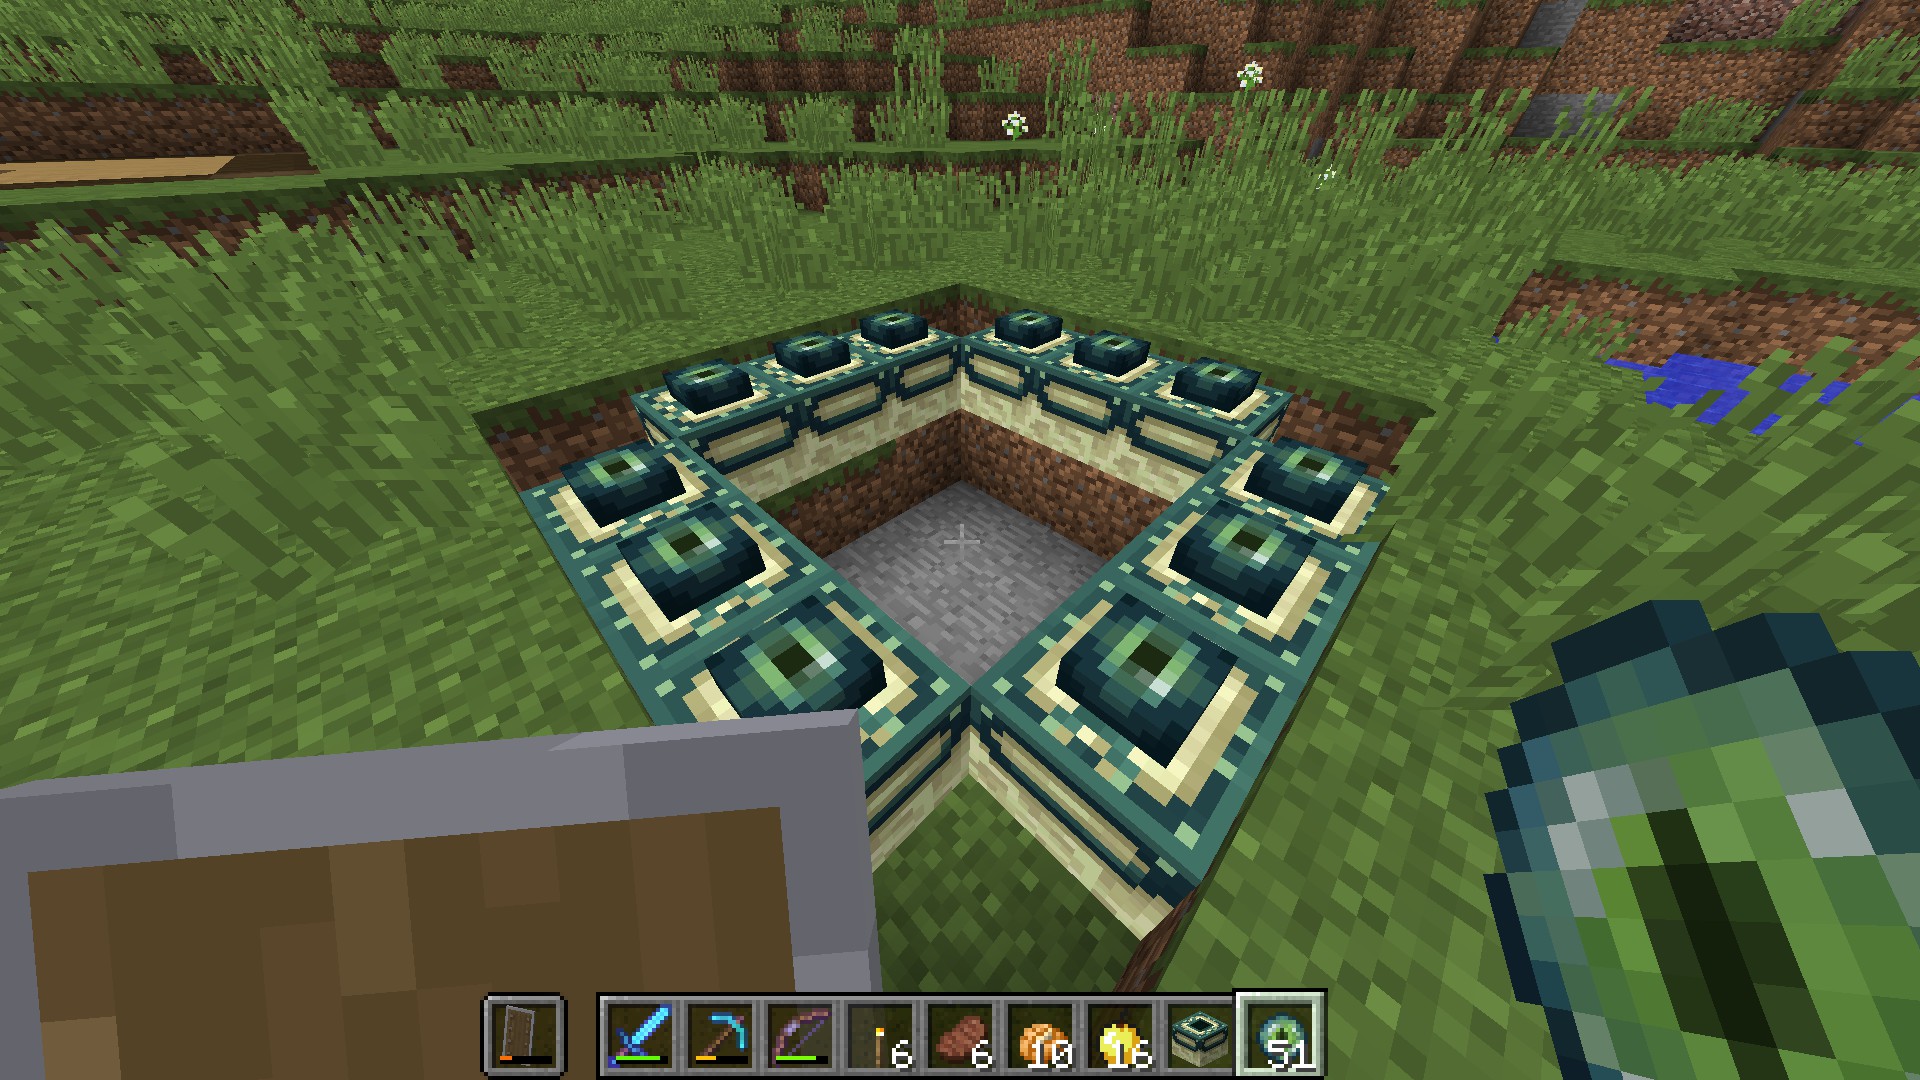 Minecraft: How to Make an End Portal